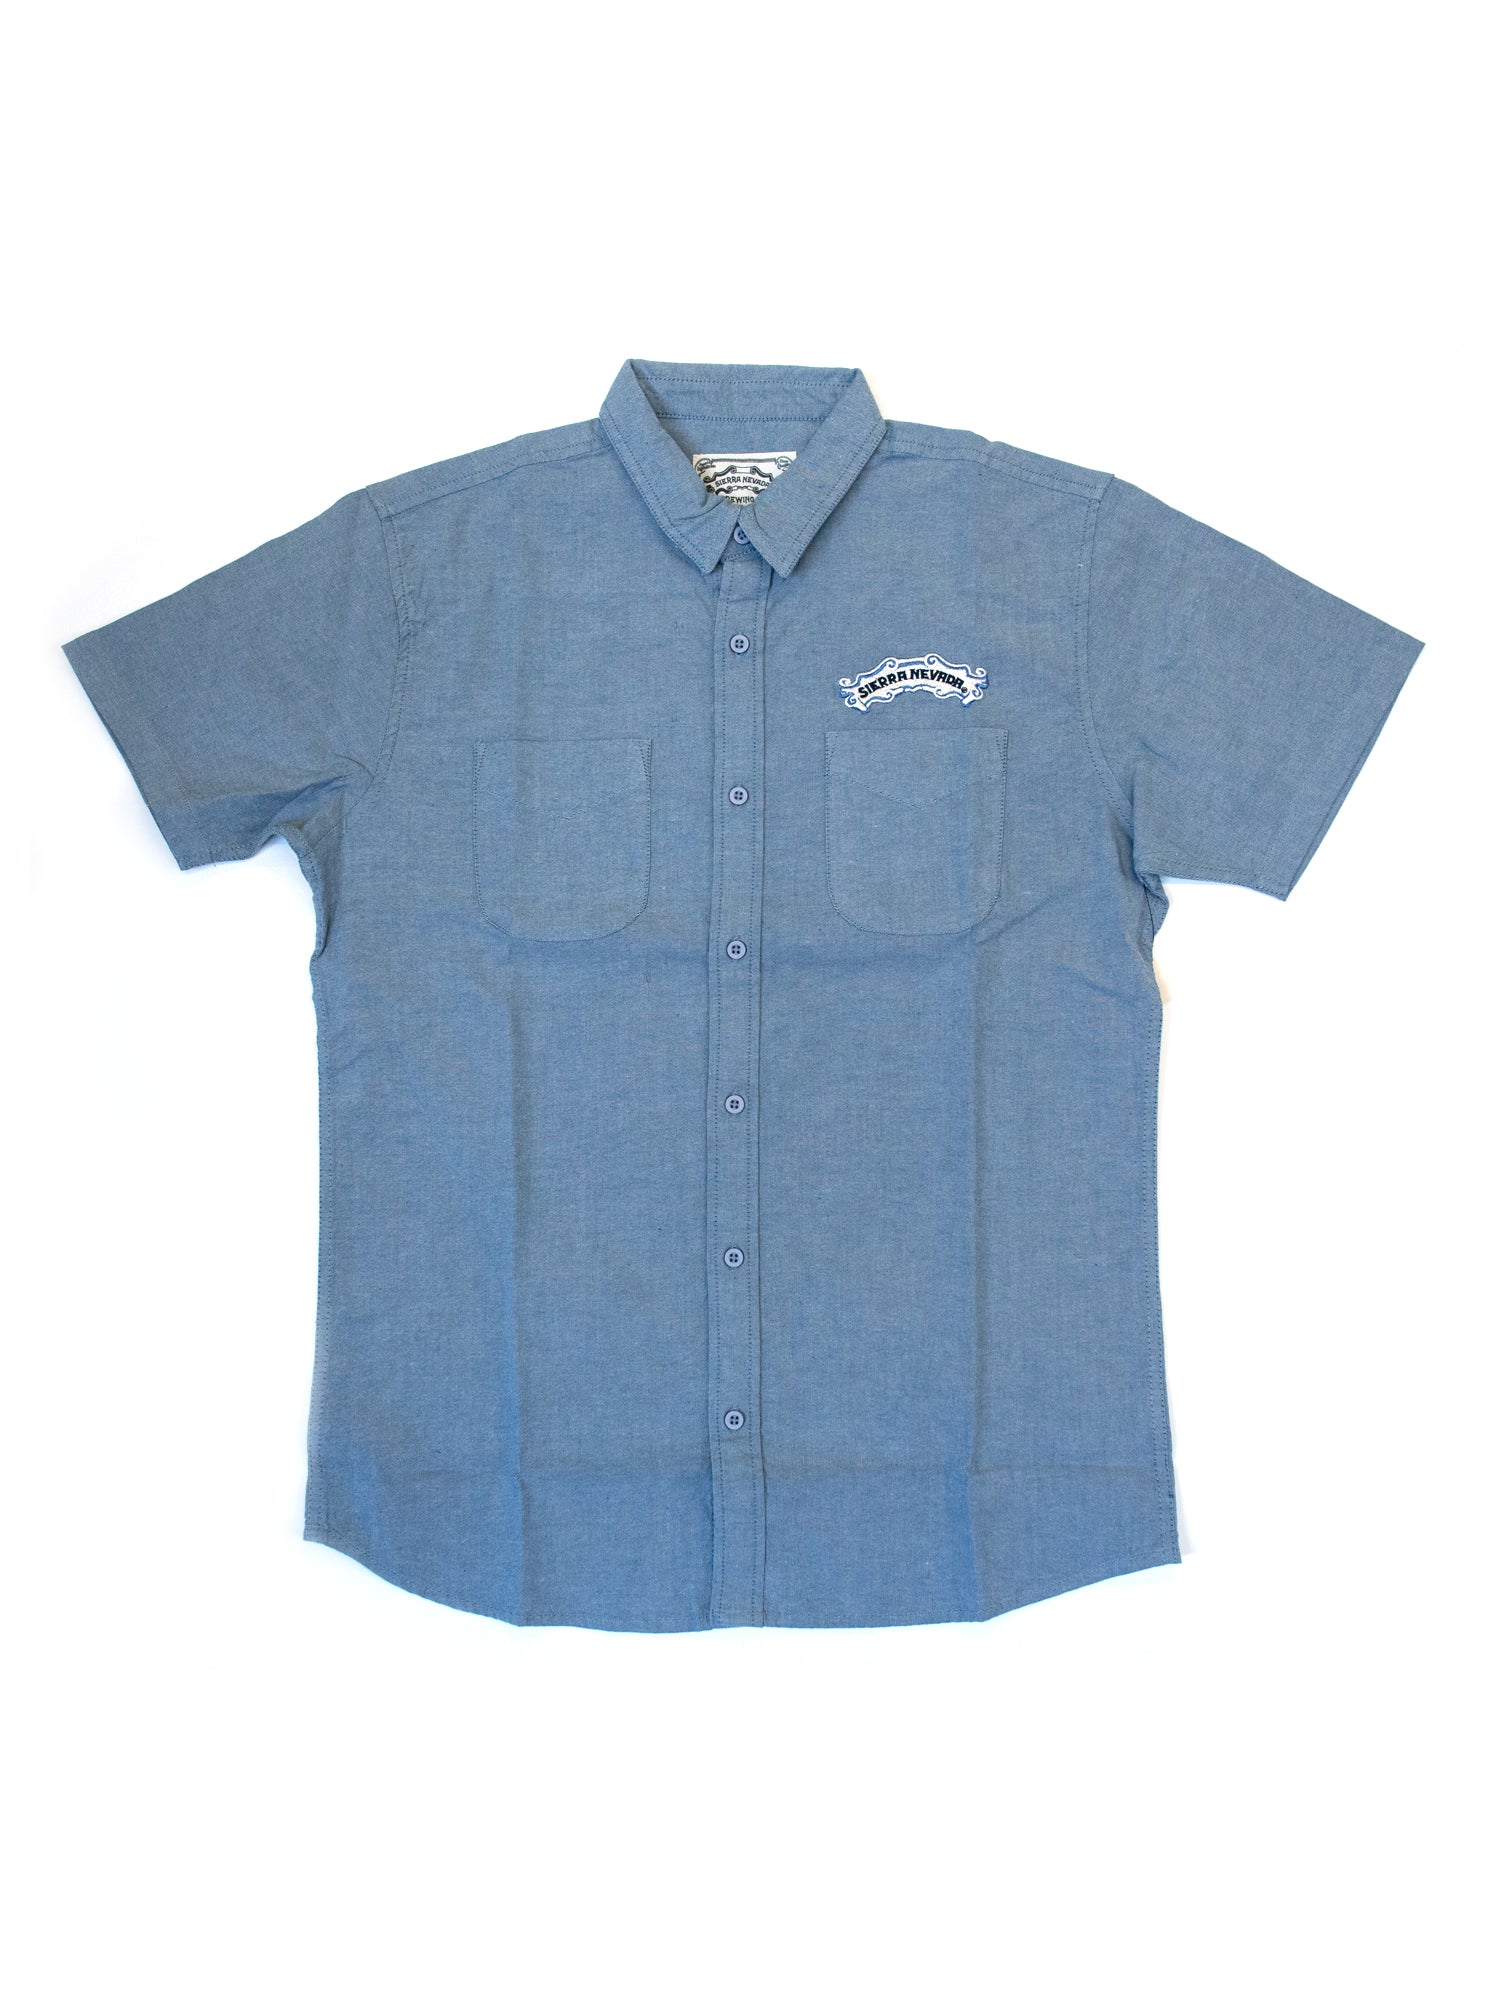 Chamber work shirt - Anderson Bros Design and Supply